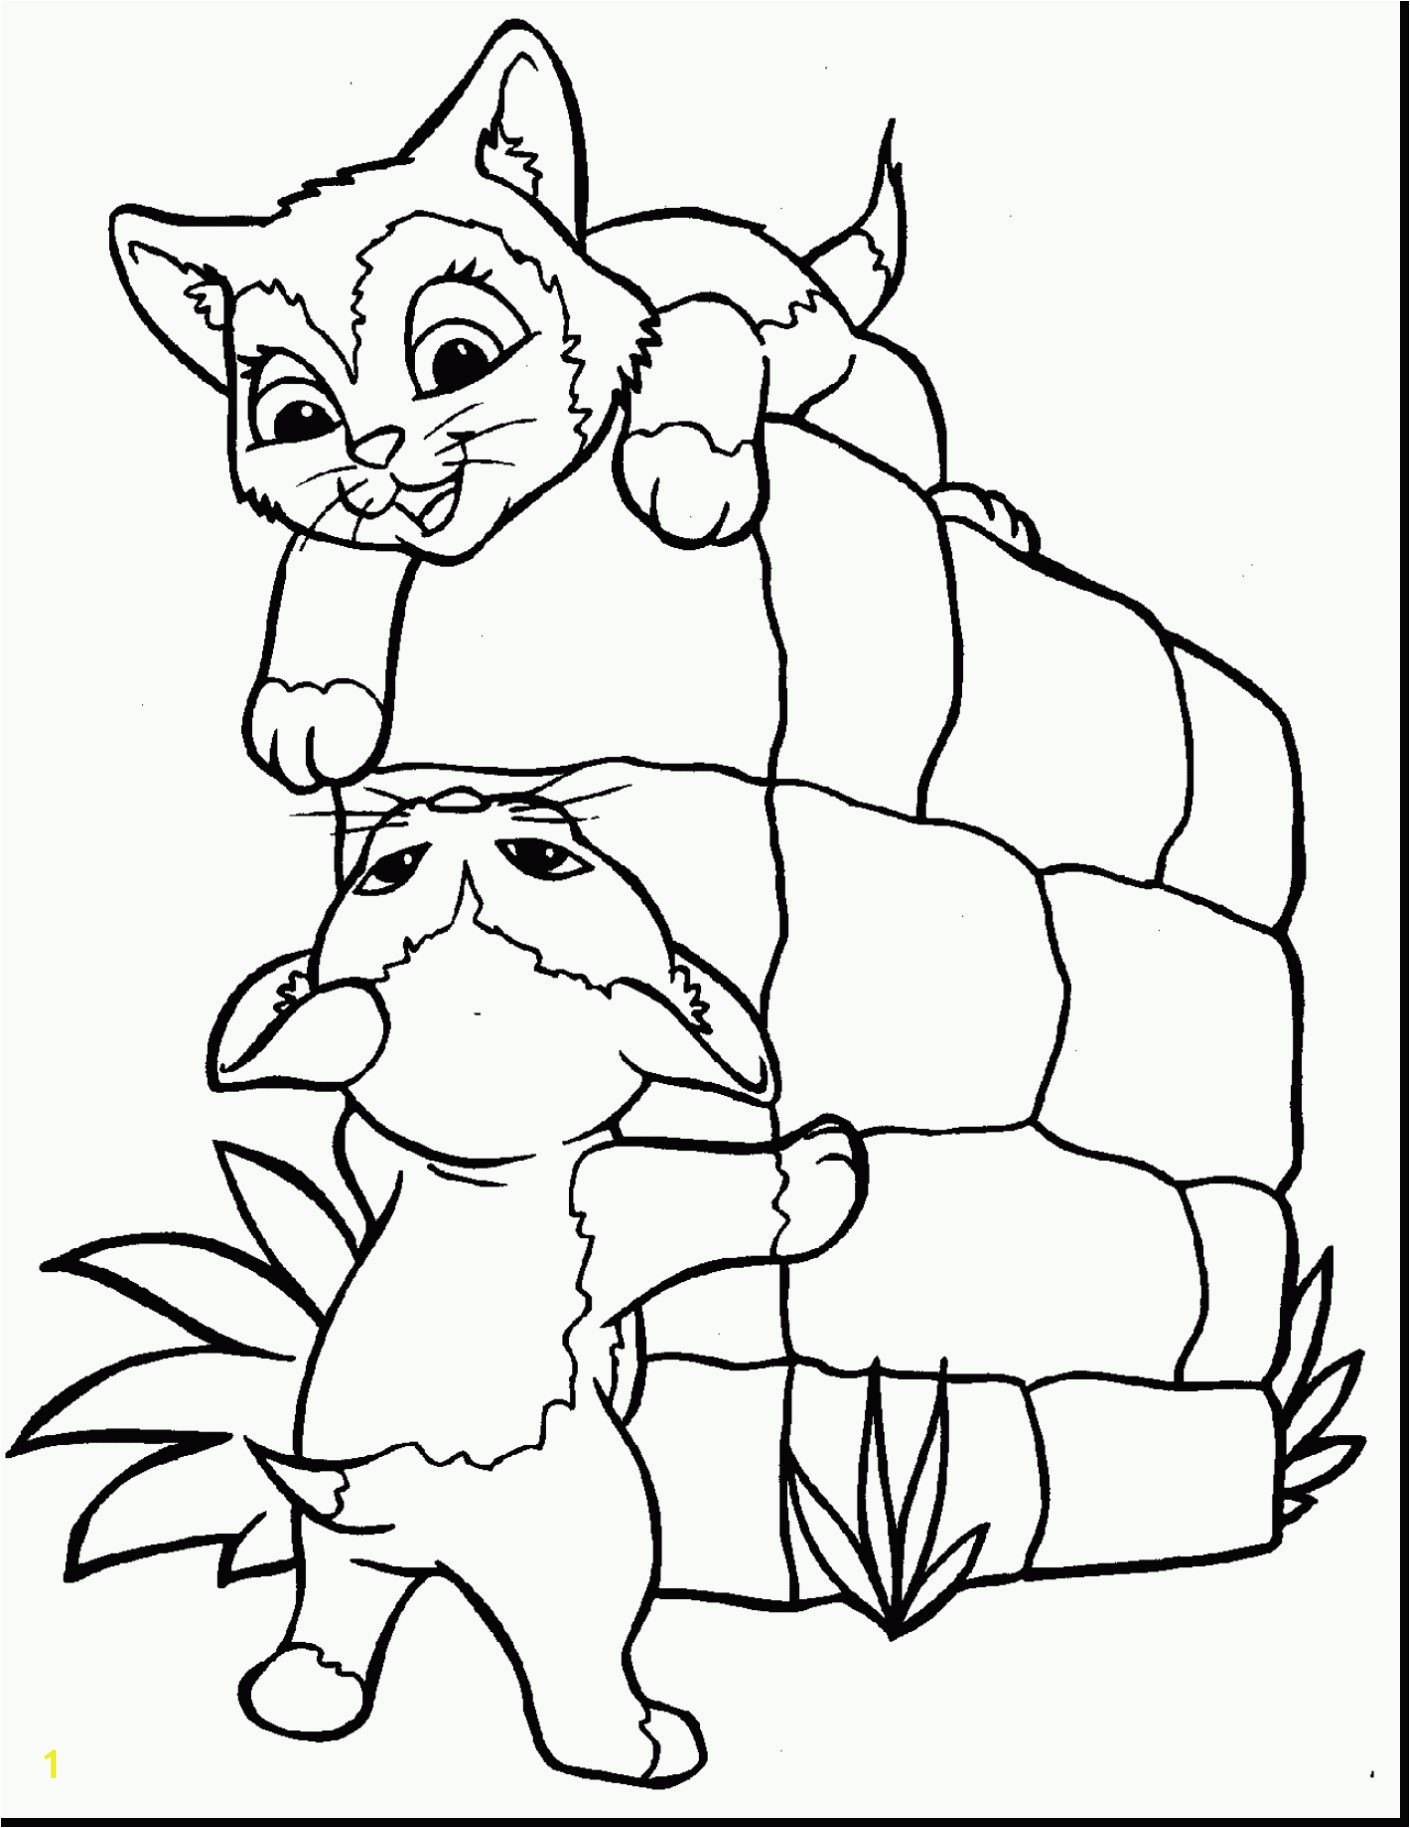 Cat Coloring Pages Free Printable Free Cat Coloring Pages to Print Fresh Dog and Cat Coloring Pages